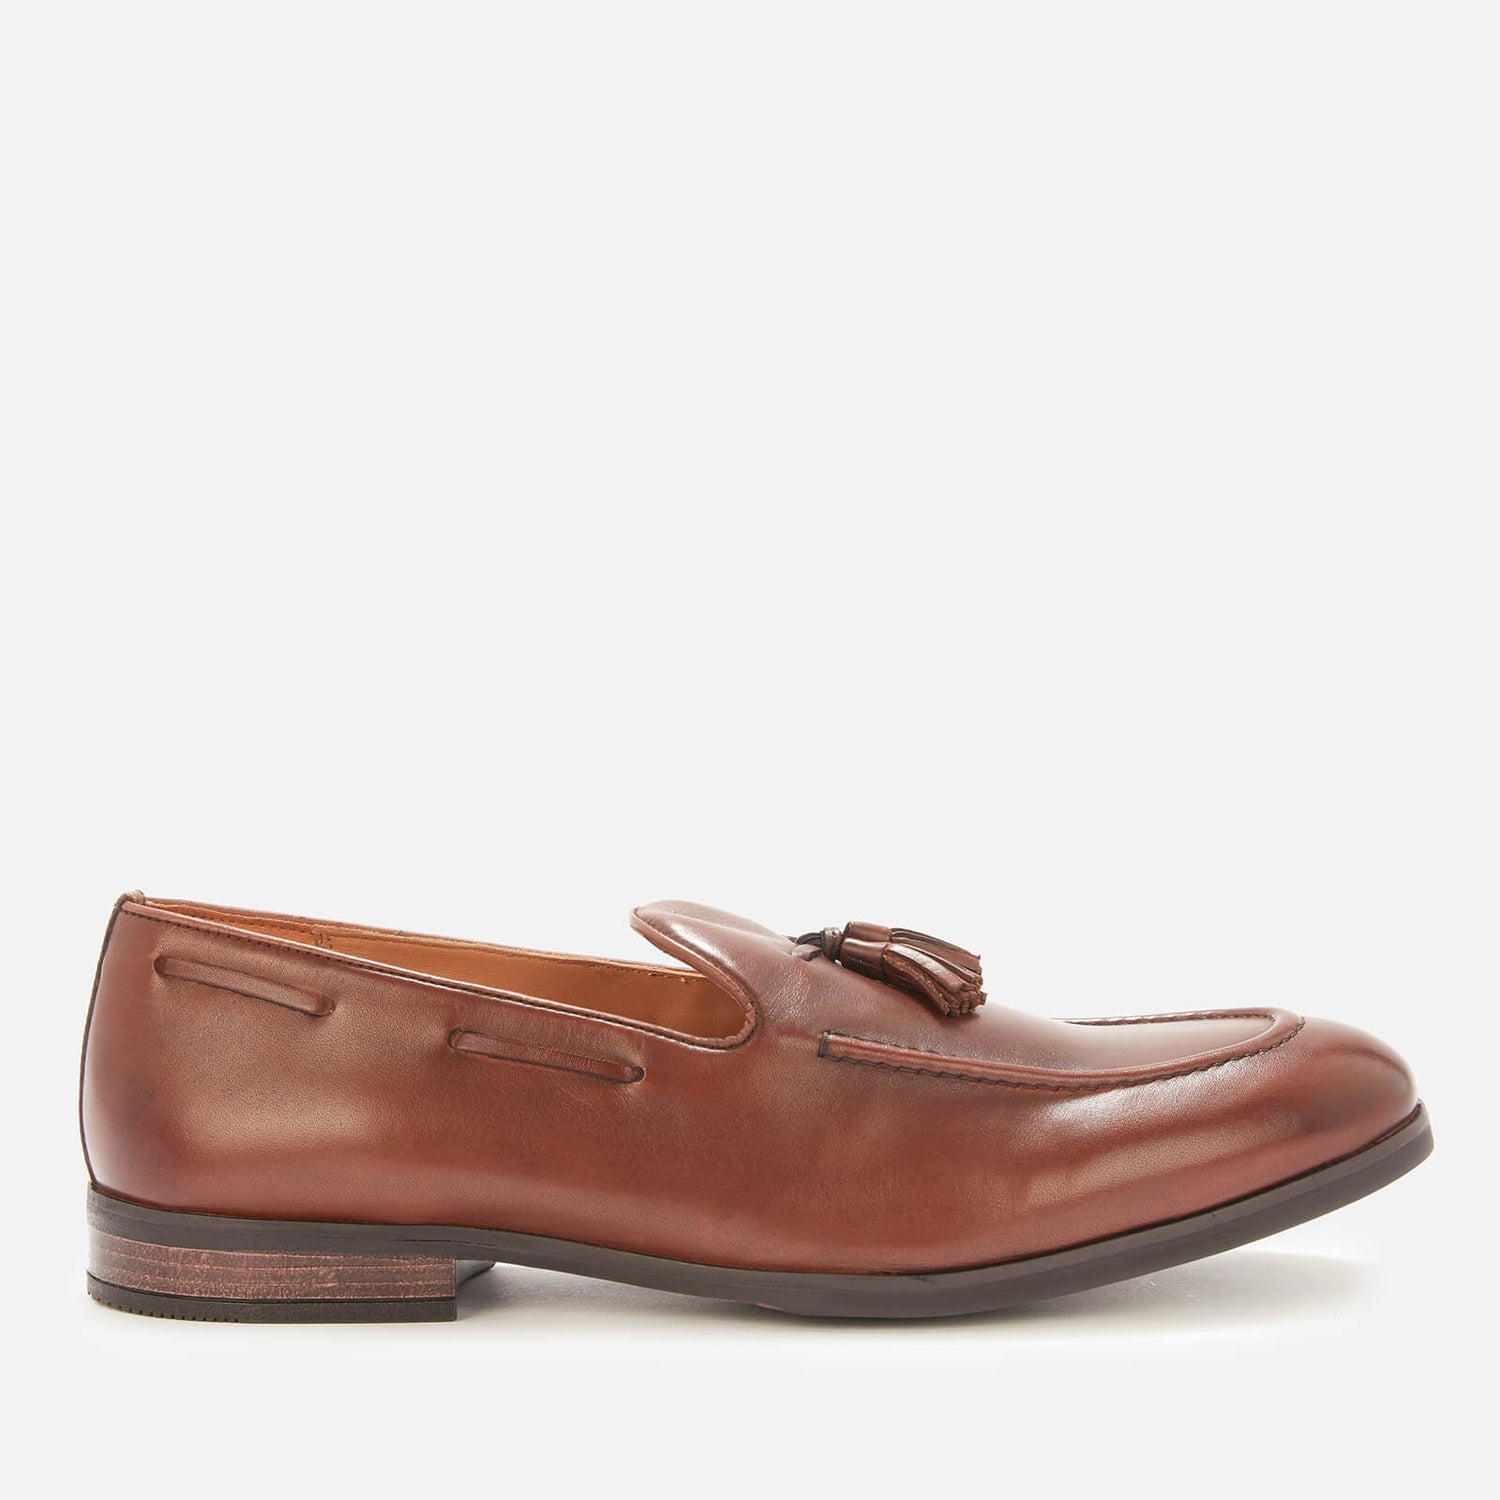 Clarks Men's Citistrideslip Leather Loafers - Tan